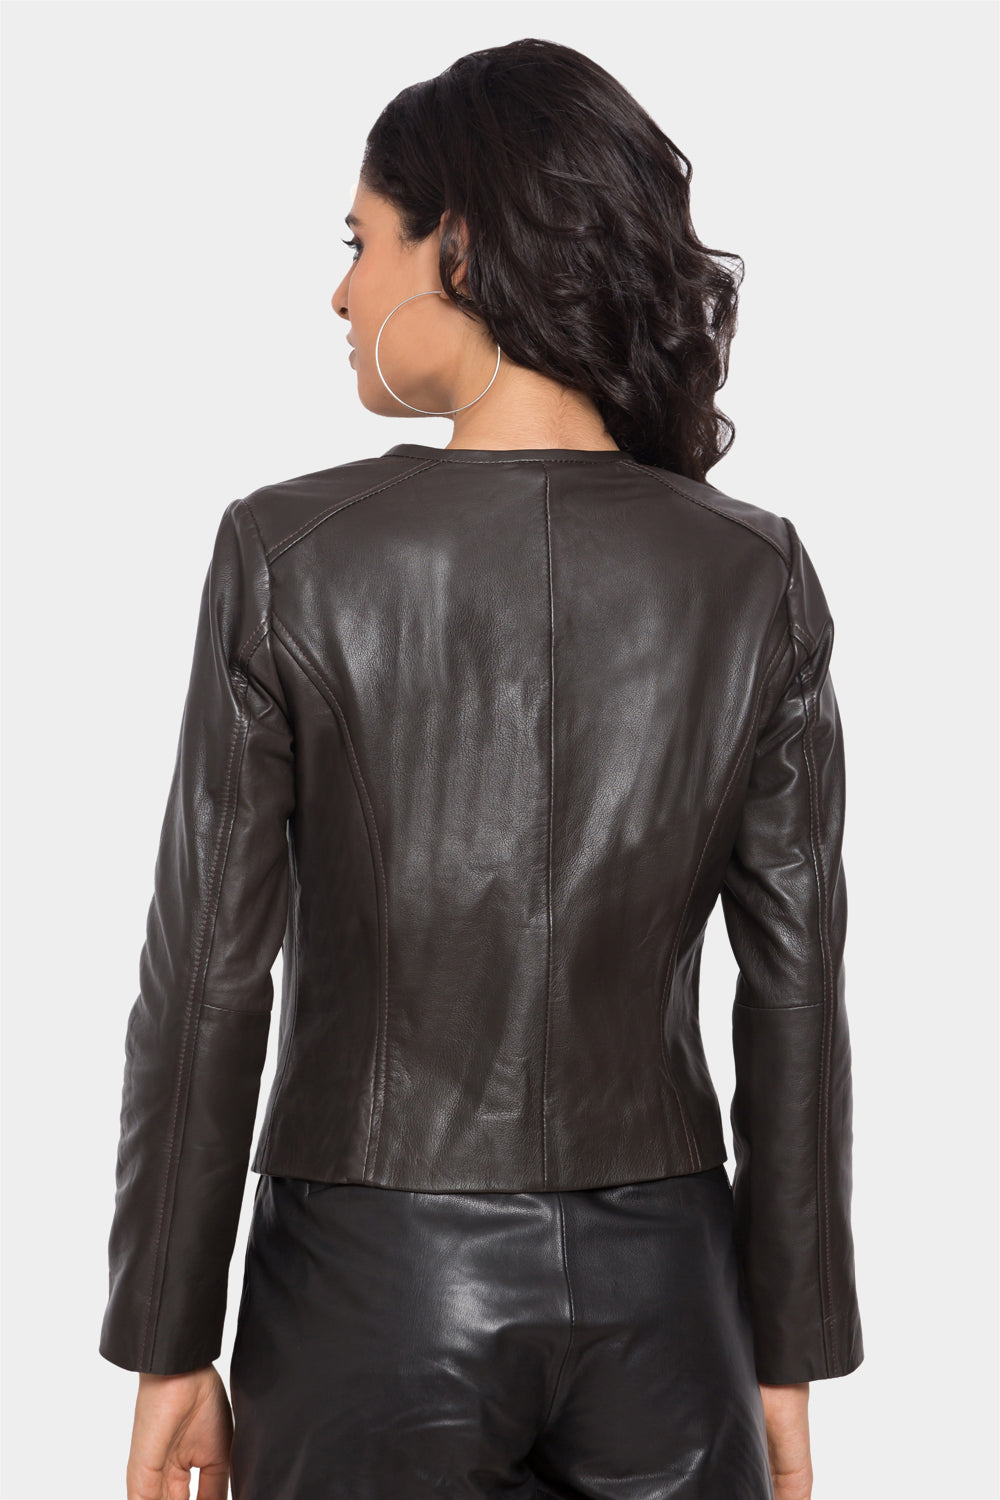 "Justbrown" Skinny Fit Leather Jacket